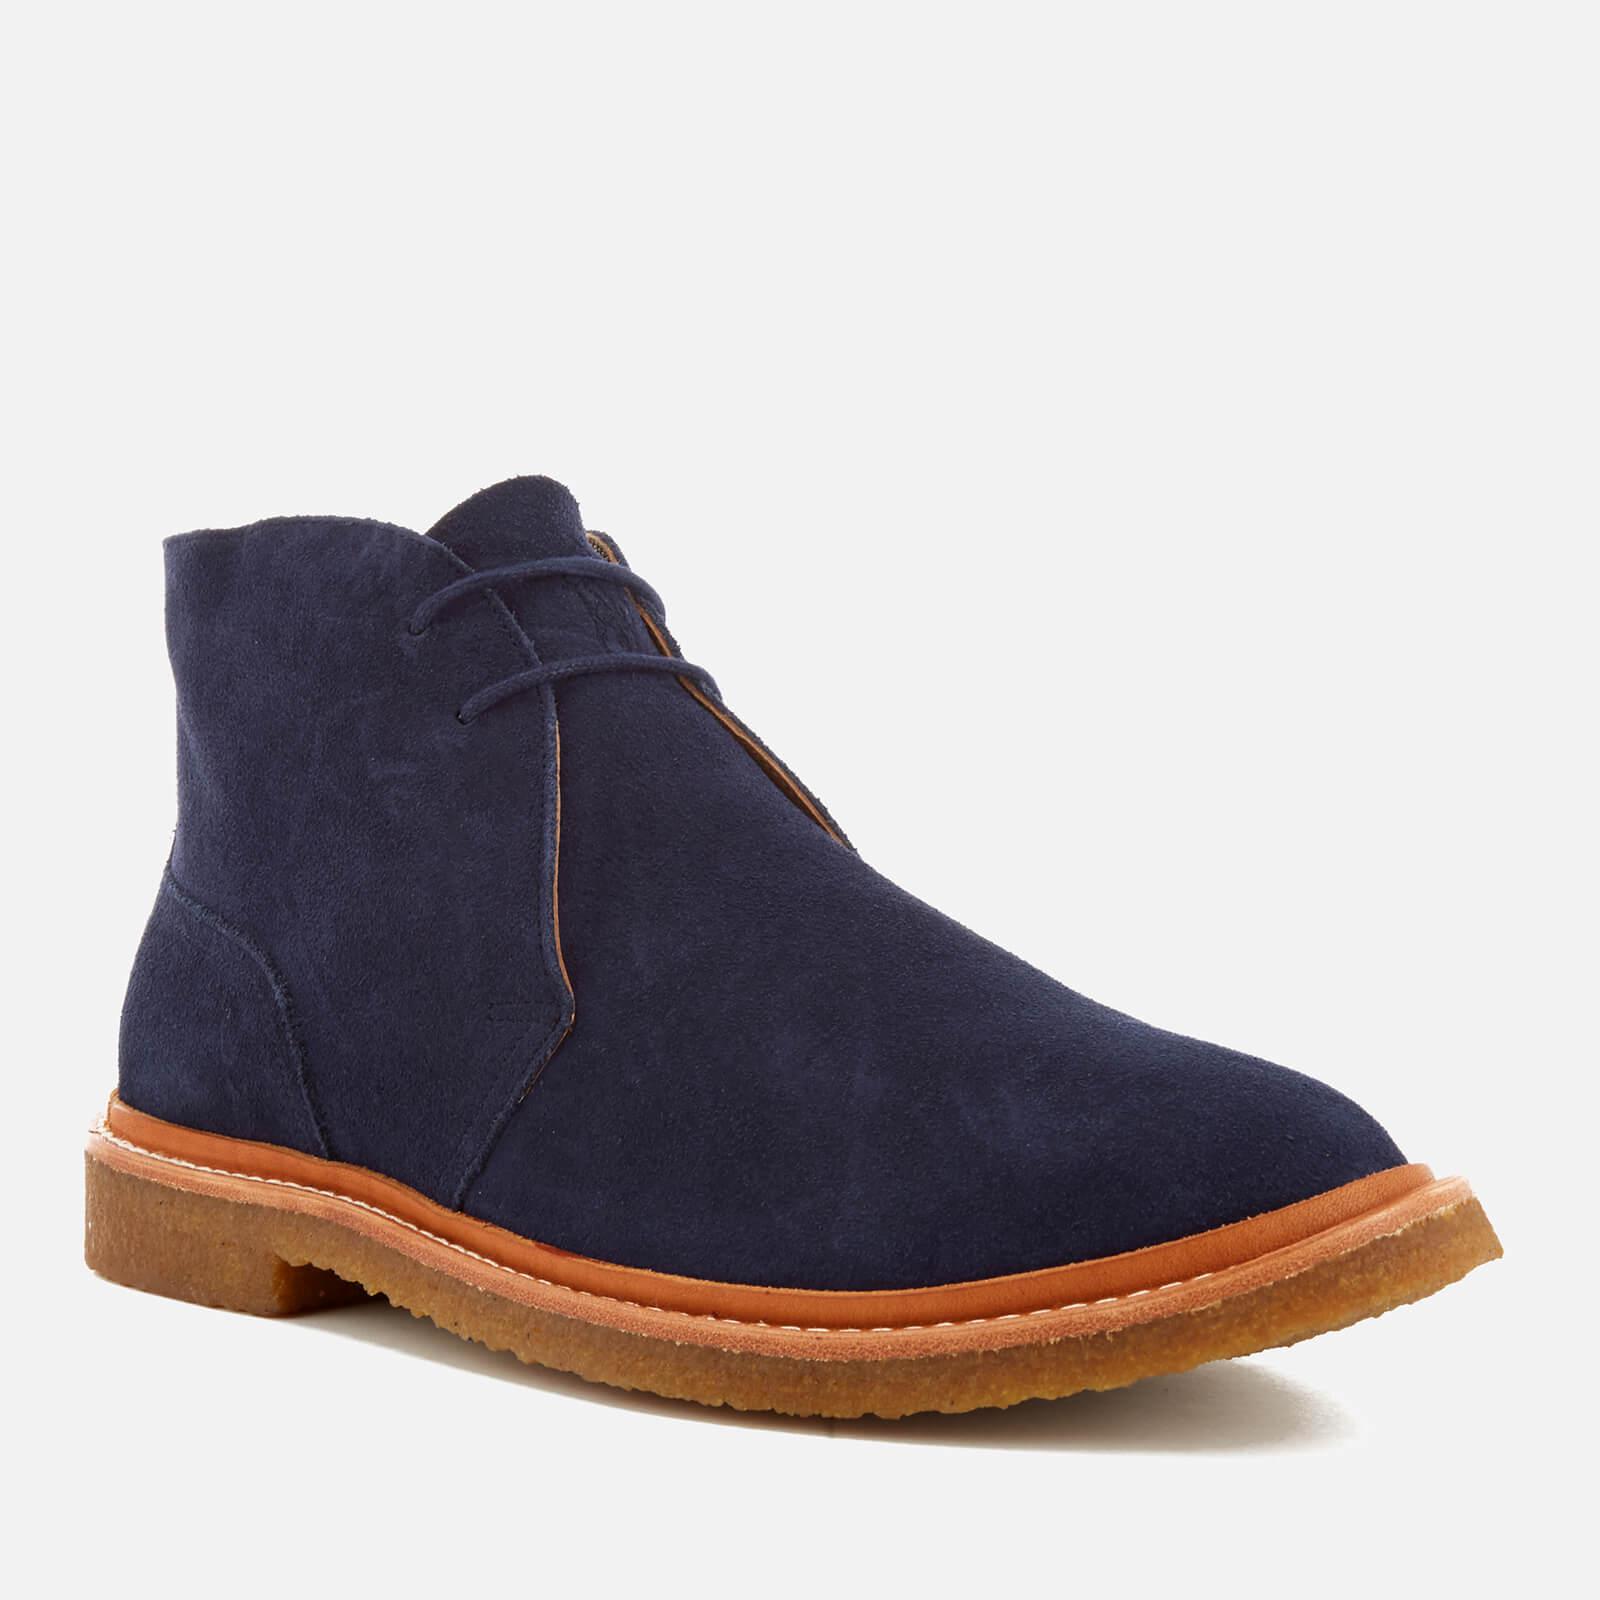 Polo Ralph Lauren Karlyle Suede Desert Boots in Blue for Men - Lyst